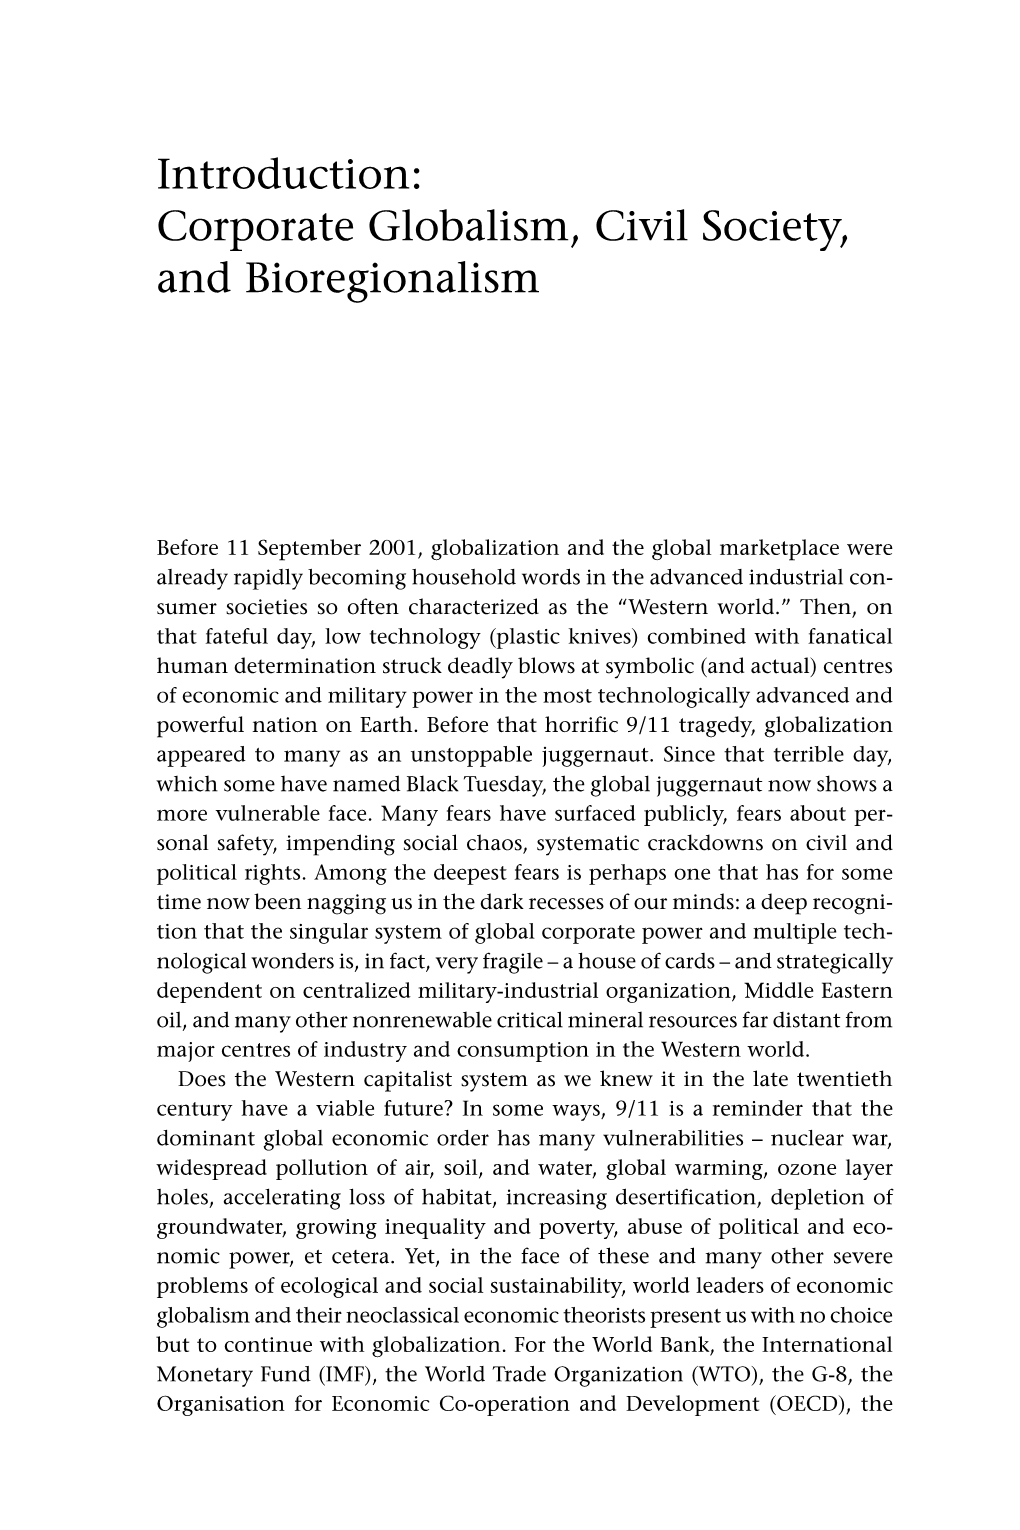 Introduction: Corporate Globalism, Civil Society, and Bioregionalism